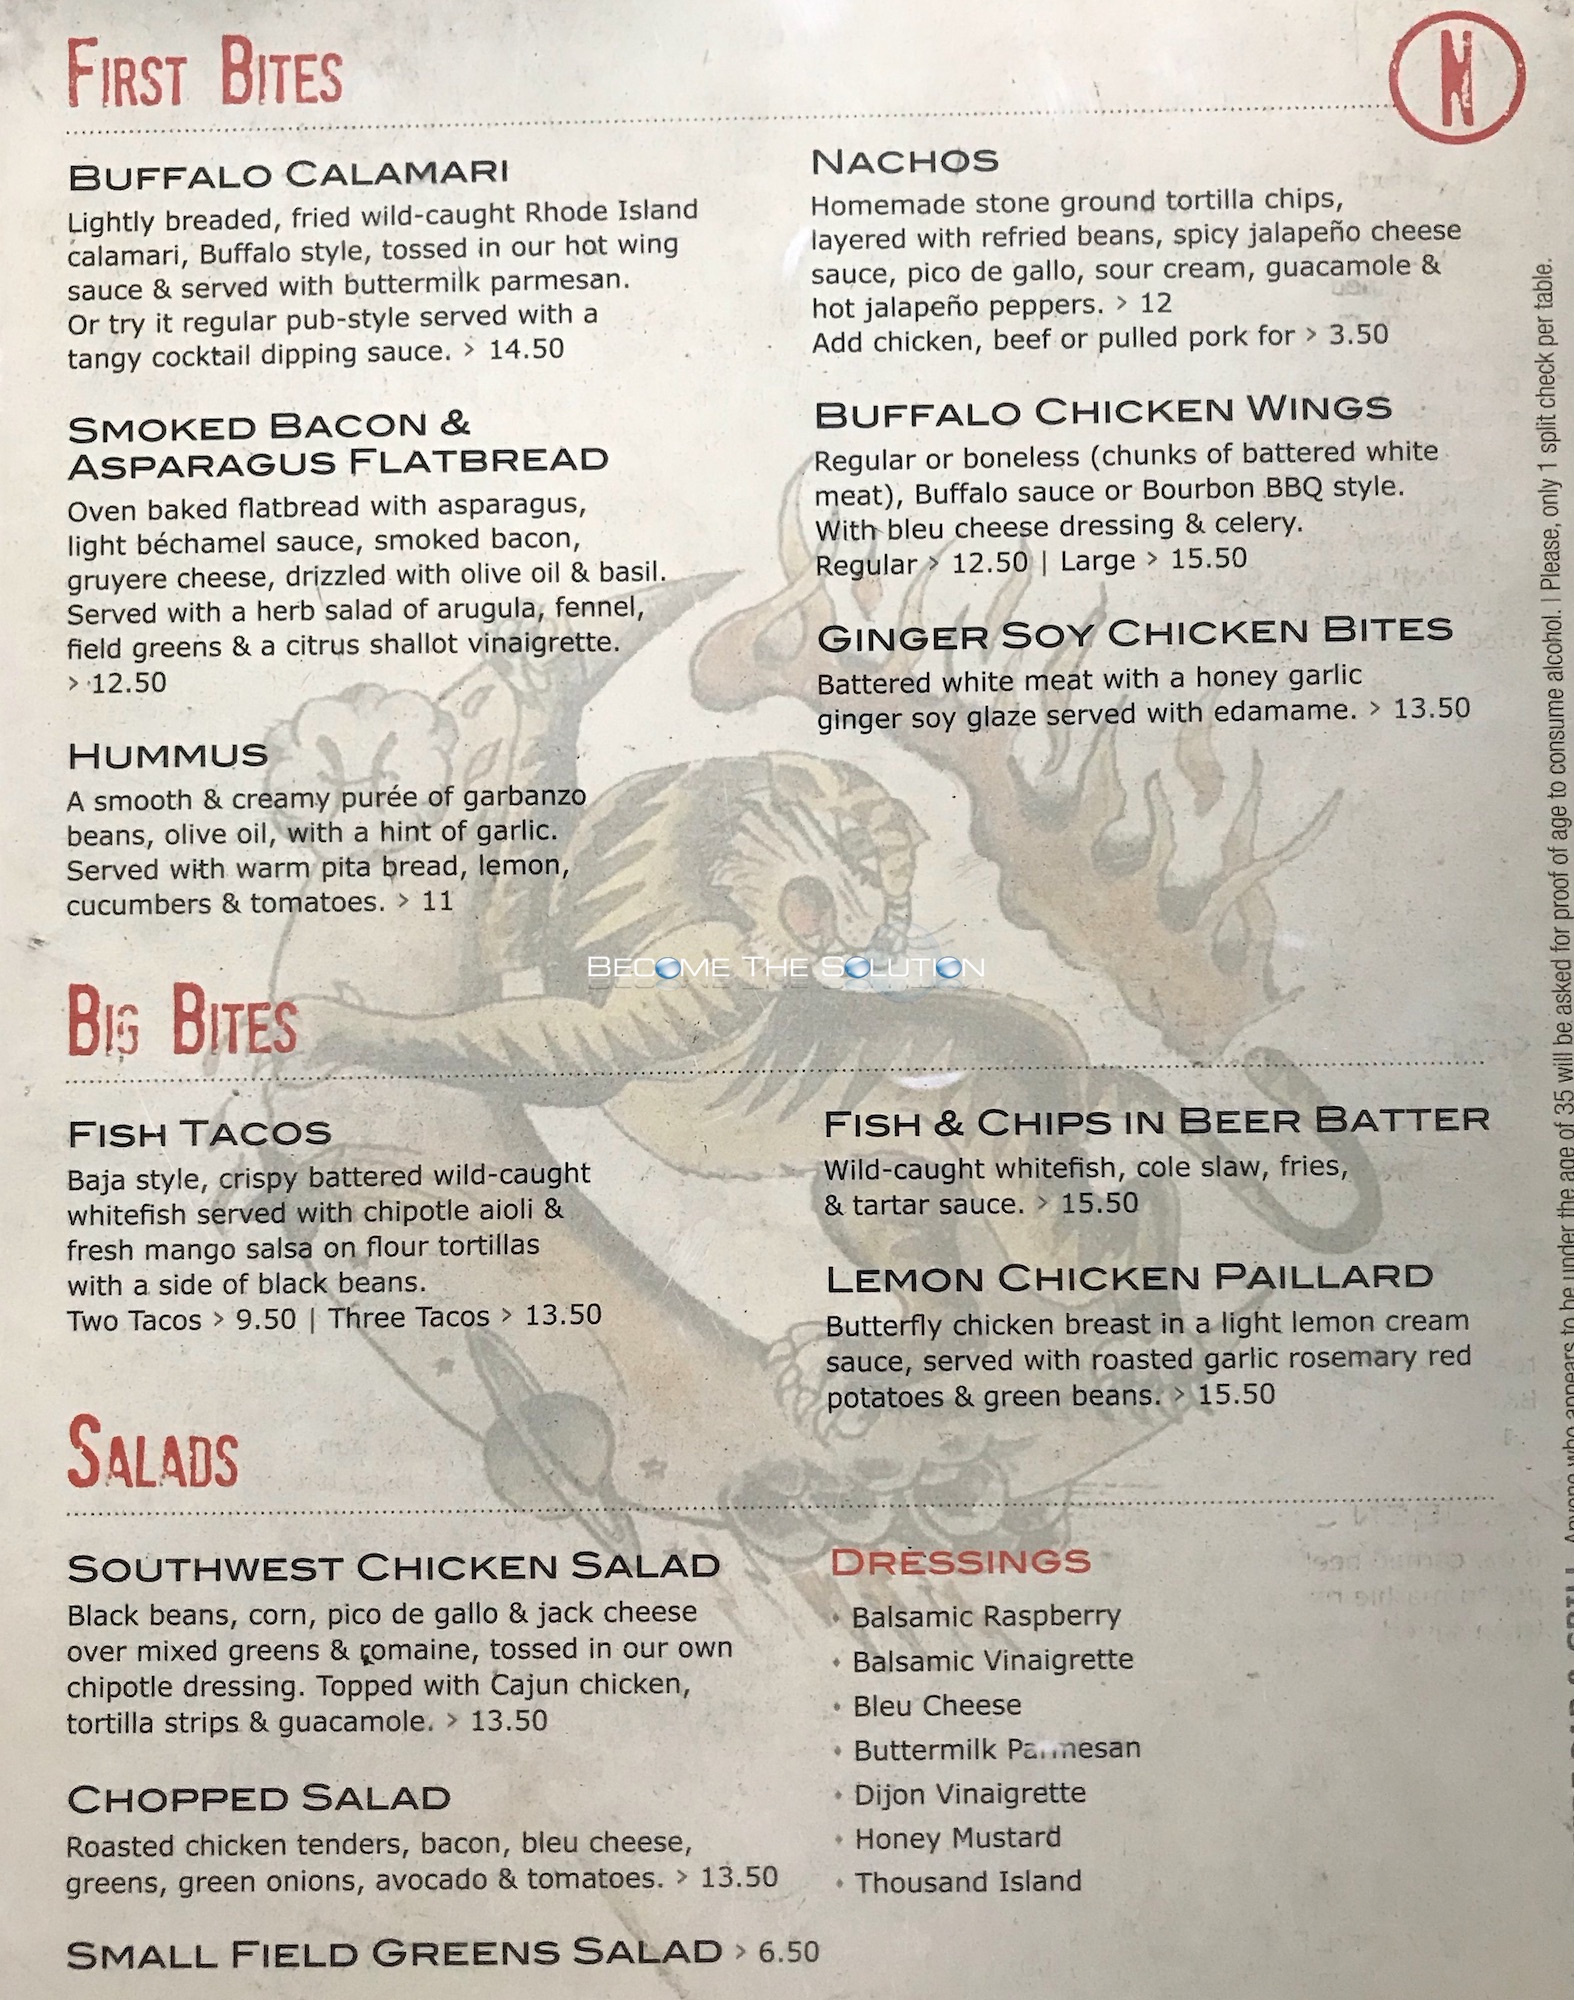 Northside bar and grill chicago menu 2